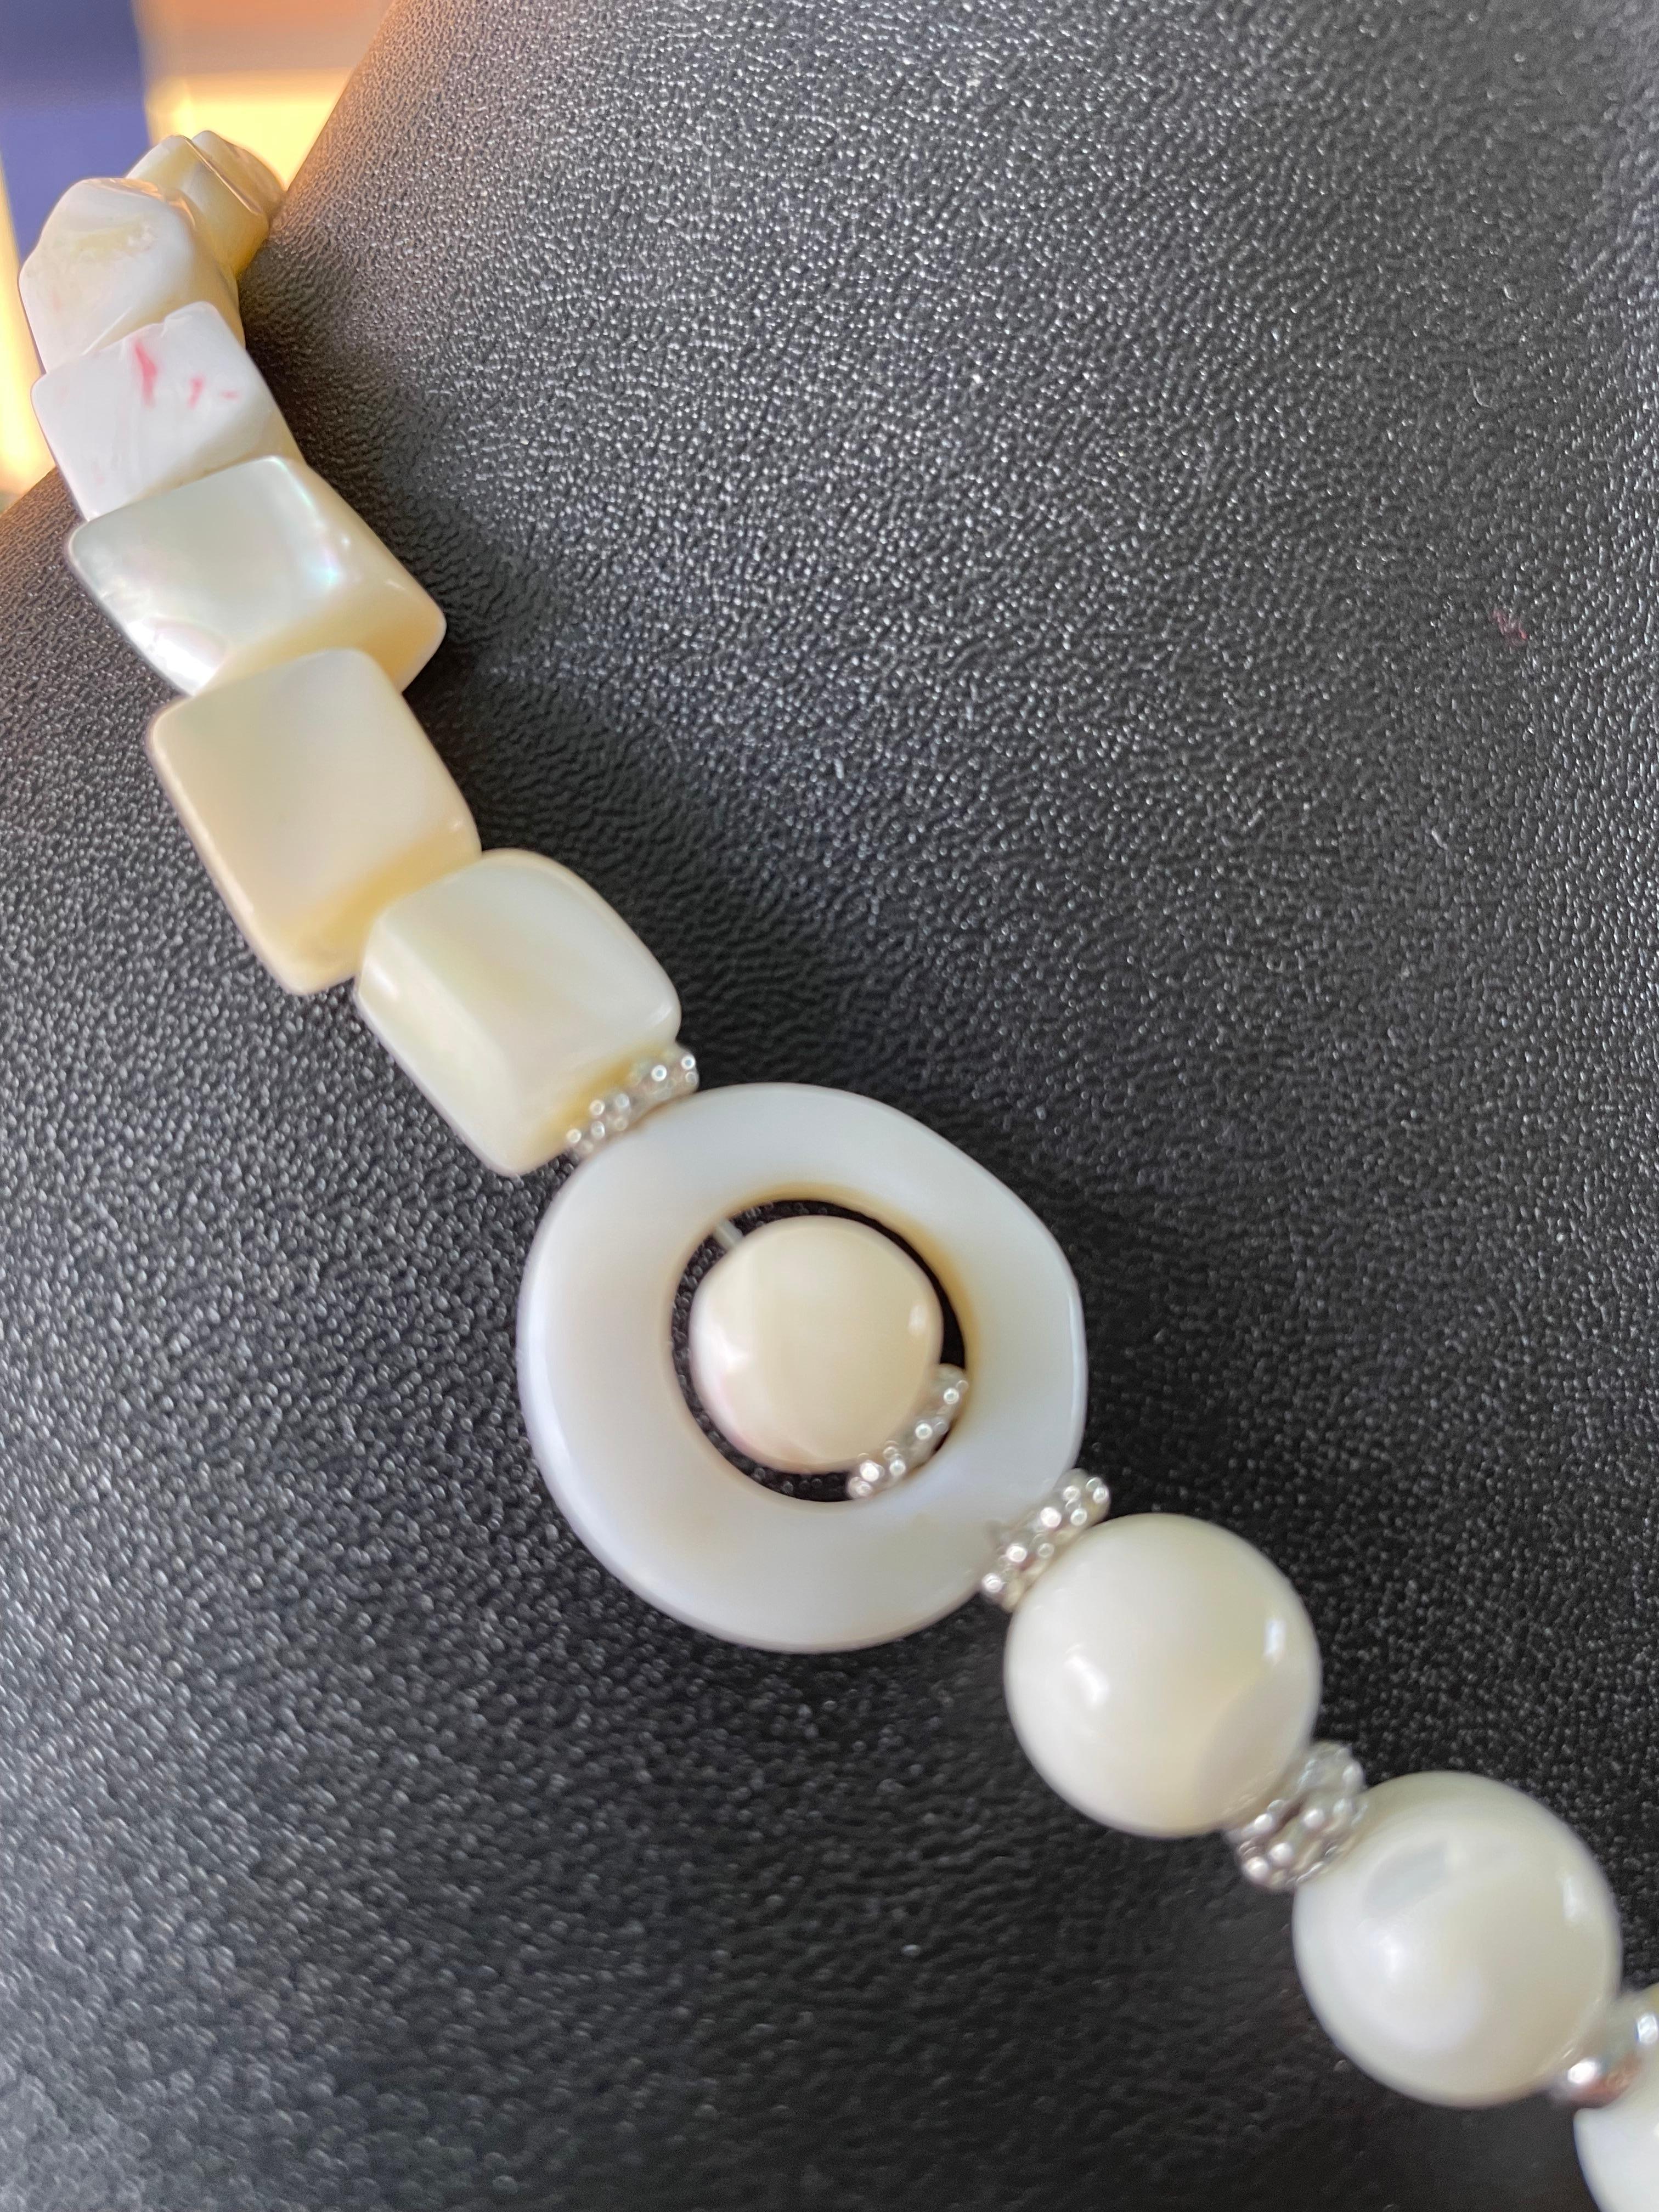 Bead LB Antique carved Mother of Pearl Chinese pendant necklace with MOP beads For Sale